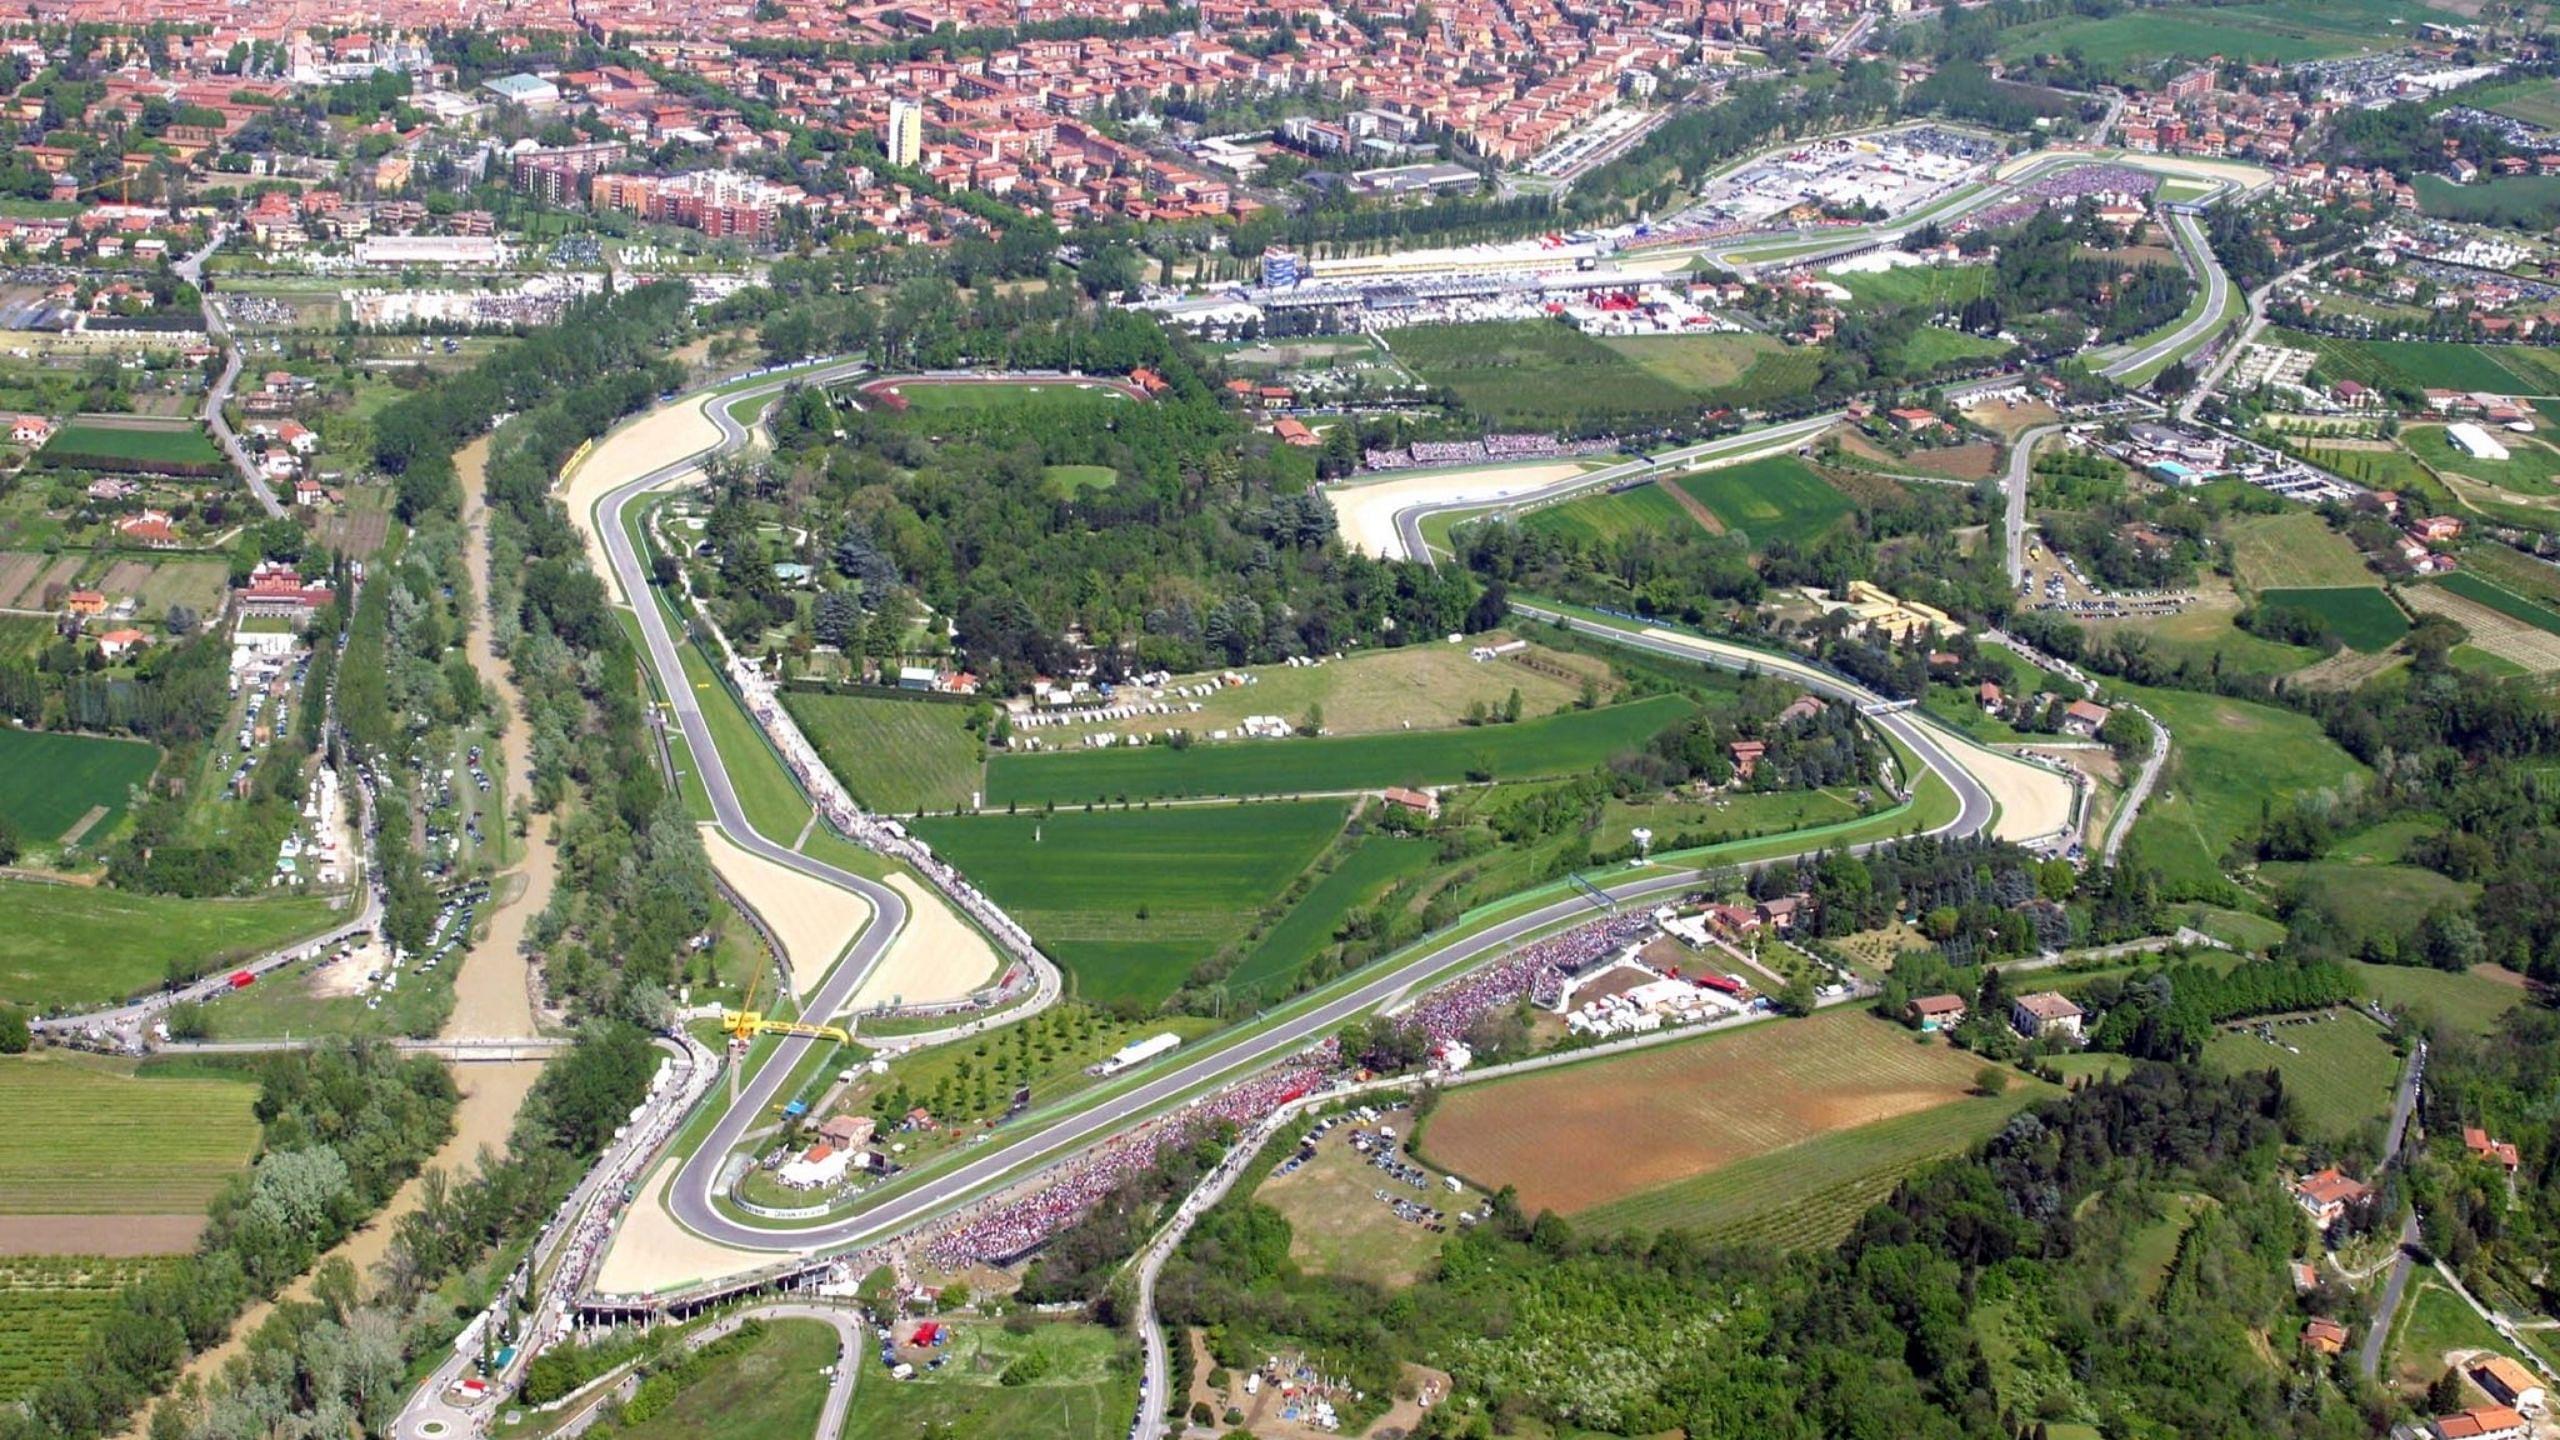 F1 Live Stream Emilia Romagna GP 2020, Start Time & Broadcast Channel: When and Where to watch F1 Free Practice, Qualifying and Race held at Imola?